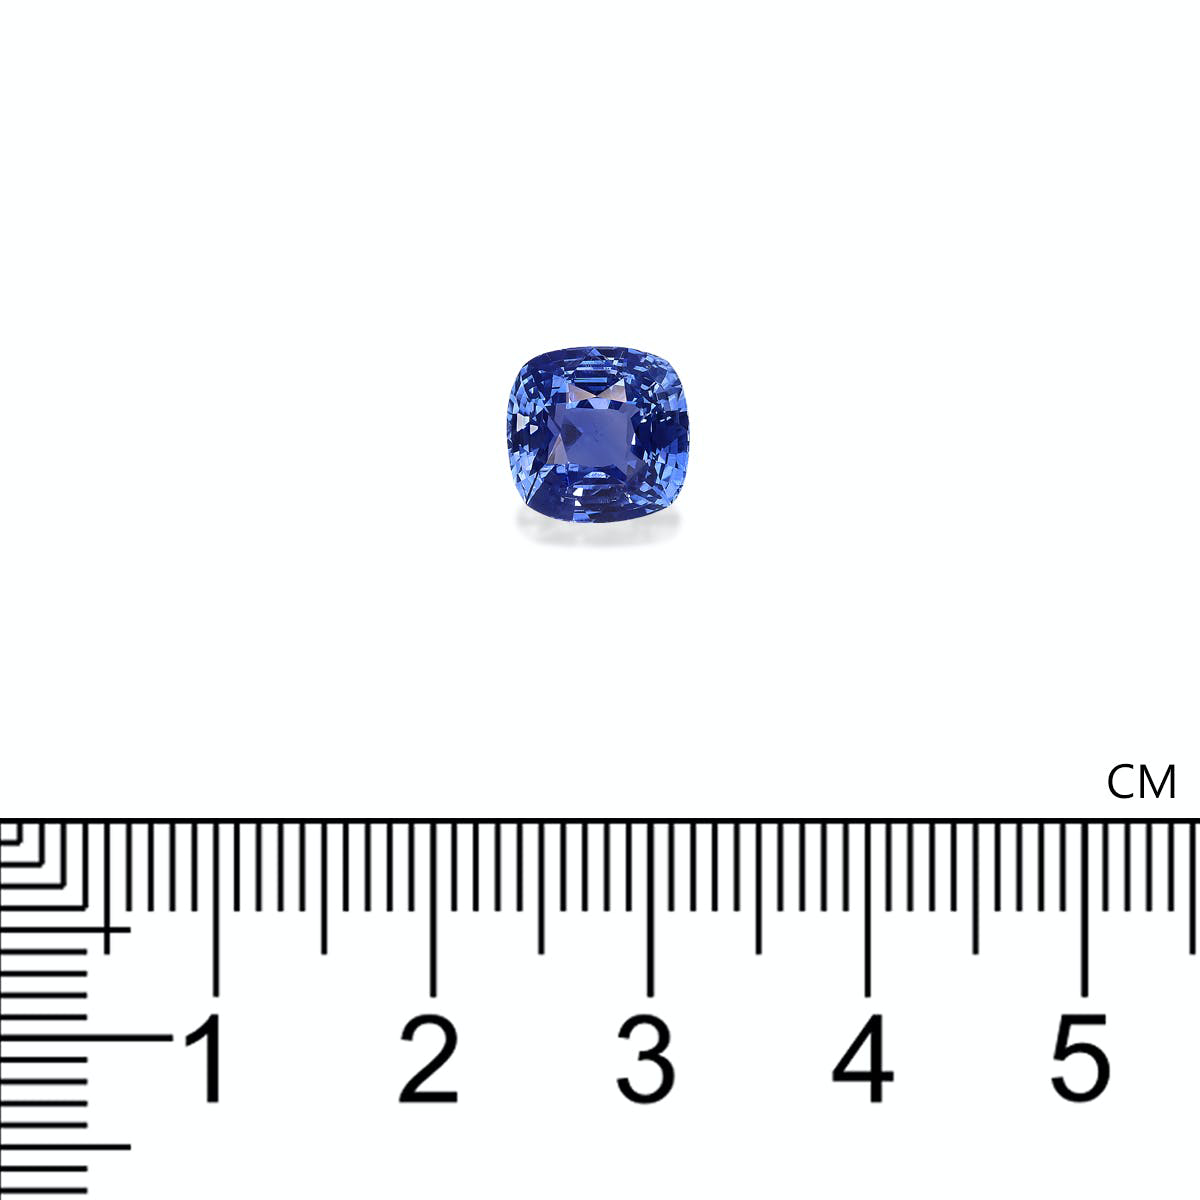 Picture of Blue Sapphire Unheated Sri Lanka 3.22ct - 8mm (BS0265)